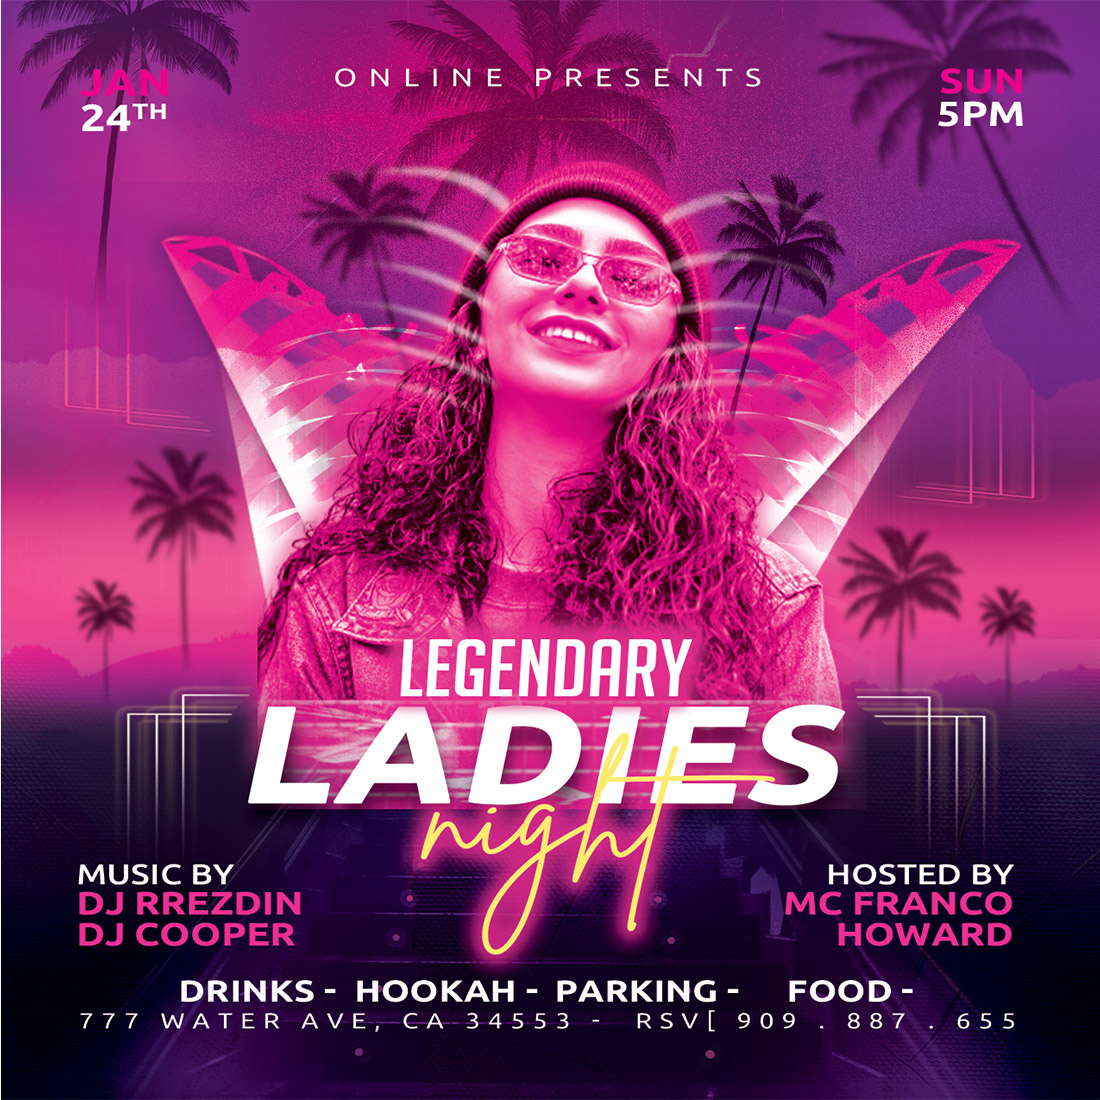 Ladis night Party Flyer Template / Instagram Banner psd preview image.